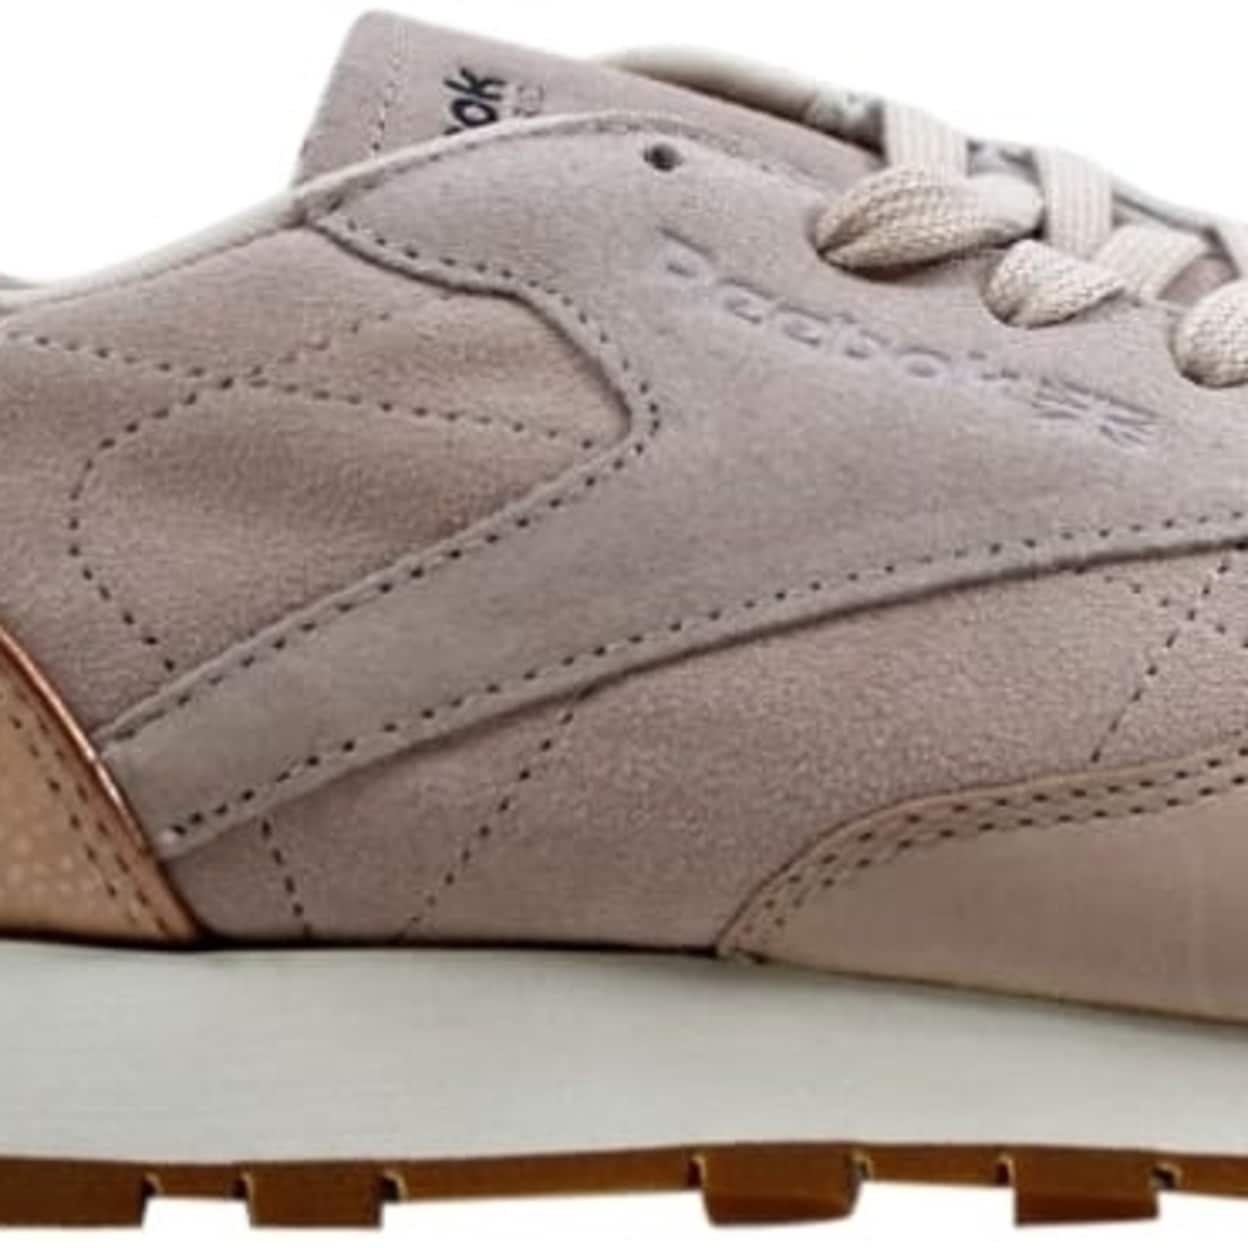 reebok classic gold leather spirit sneakers